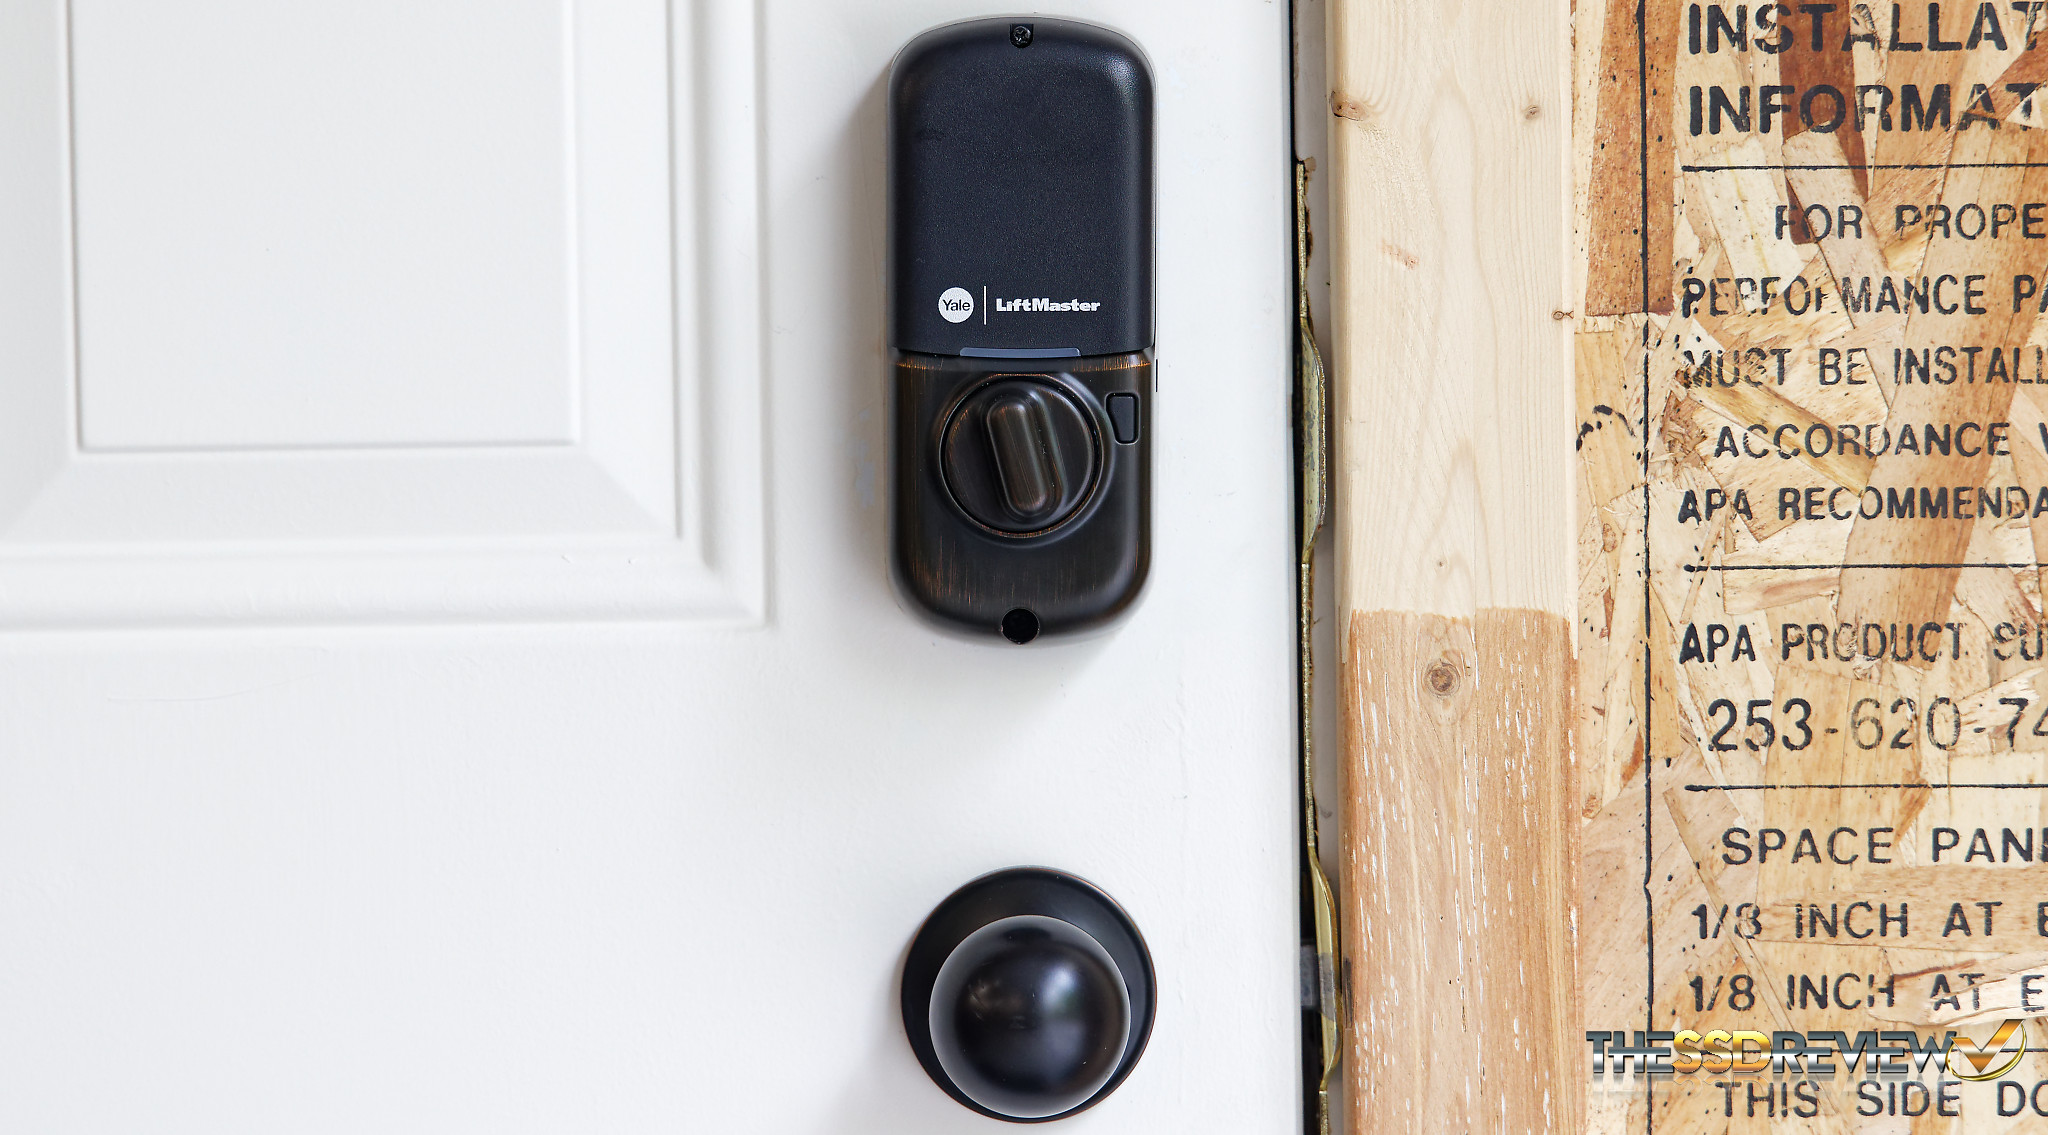 sold separately Satin Nickel Yale LiftMaster Smart Lock with Touchscreen Deadbolt- Works with myQ App & Key by  in-Garage Delivery when paired with Smart Garage Hub